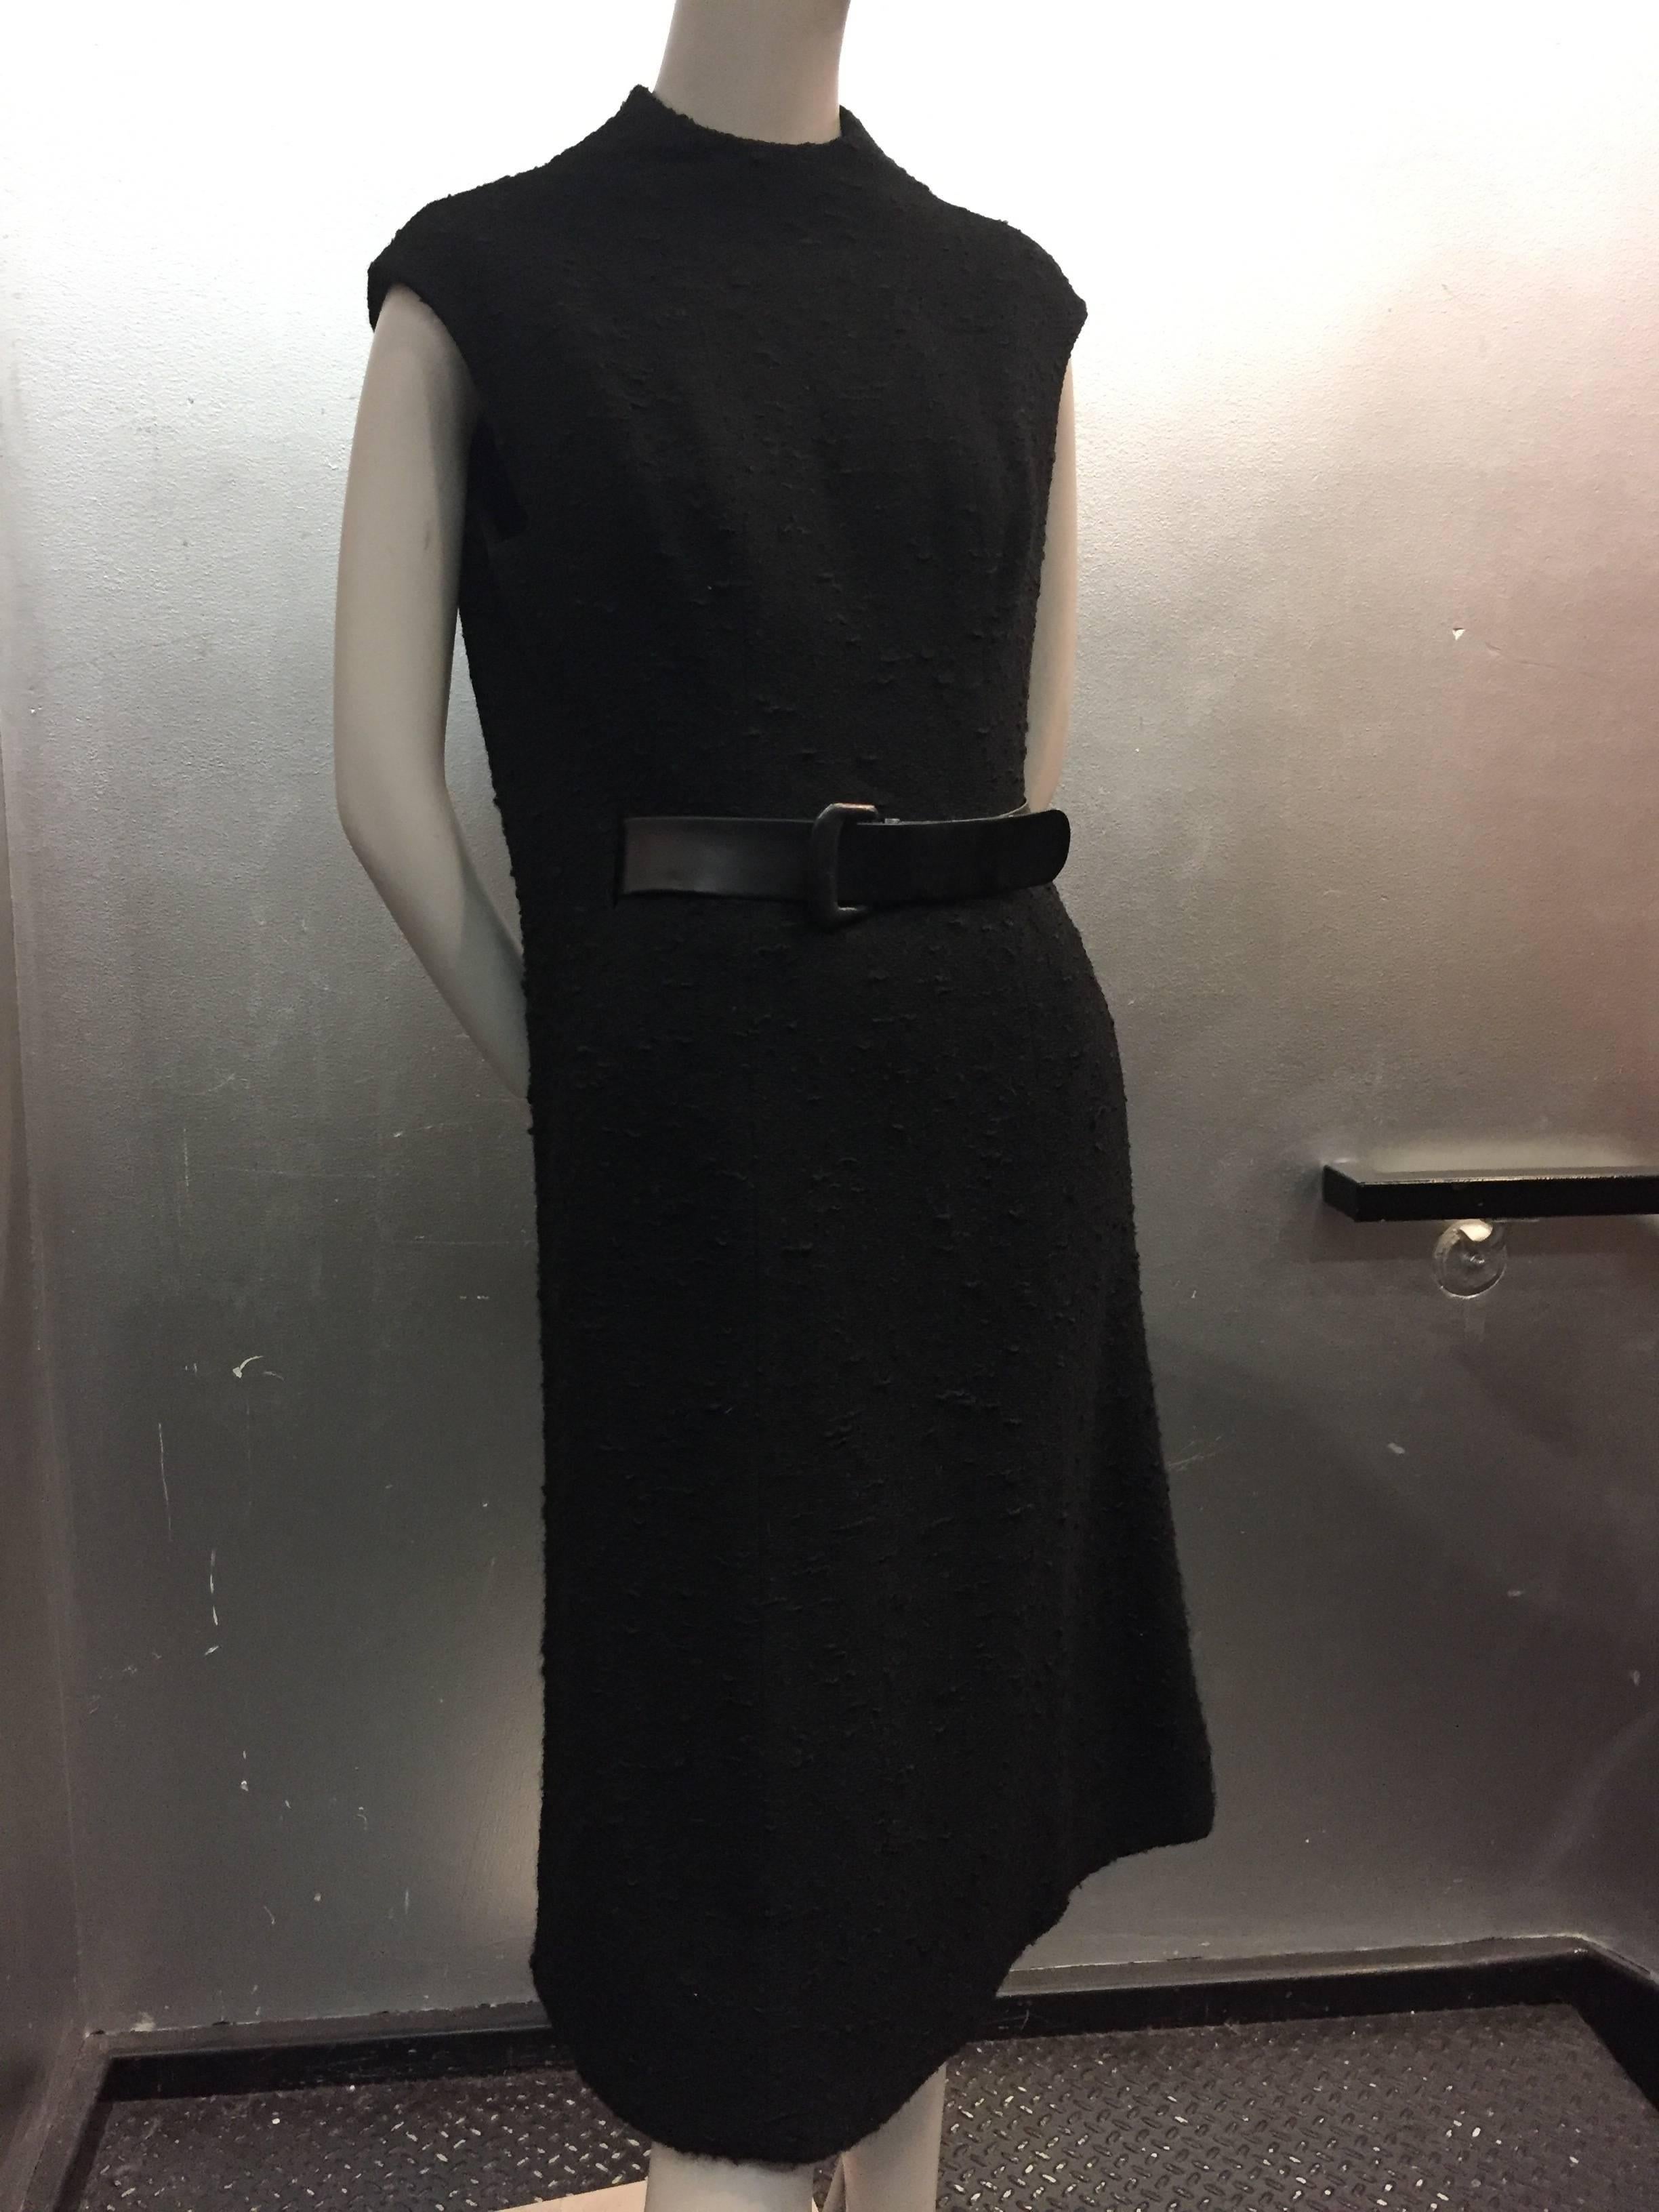 A spectacular tailored boucle shift dress with a high neck and beautifully designed leather belt technique at the waist.

The tailored boucle suit jacket features hand-crafted leather buttons and low open collar to showcase the dress.

Fully